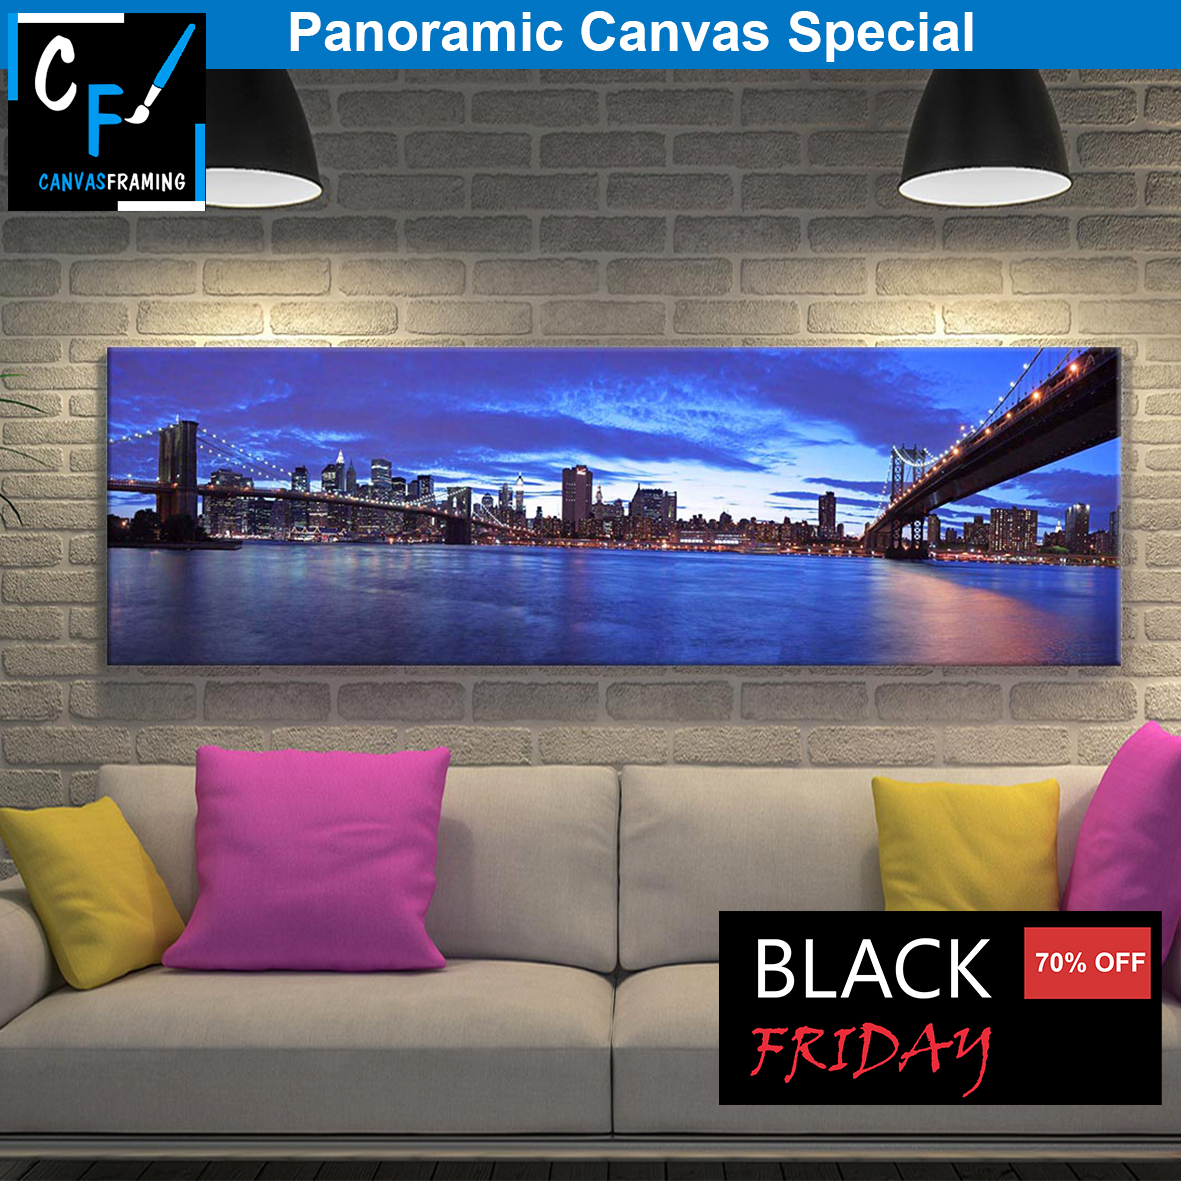 Panoramic Canvas Special